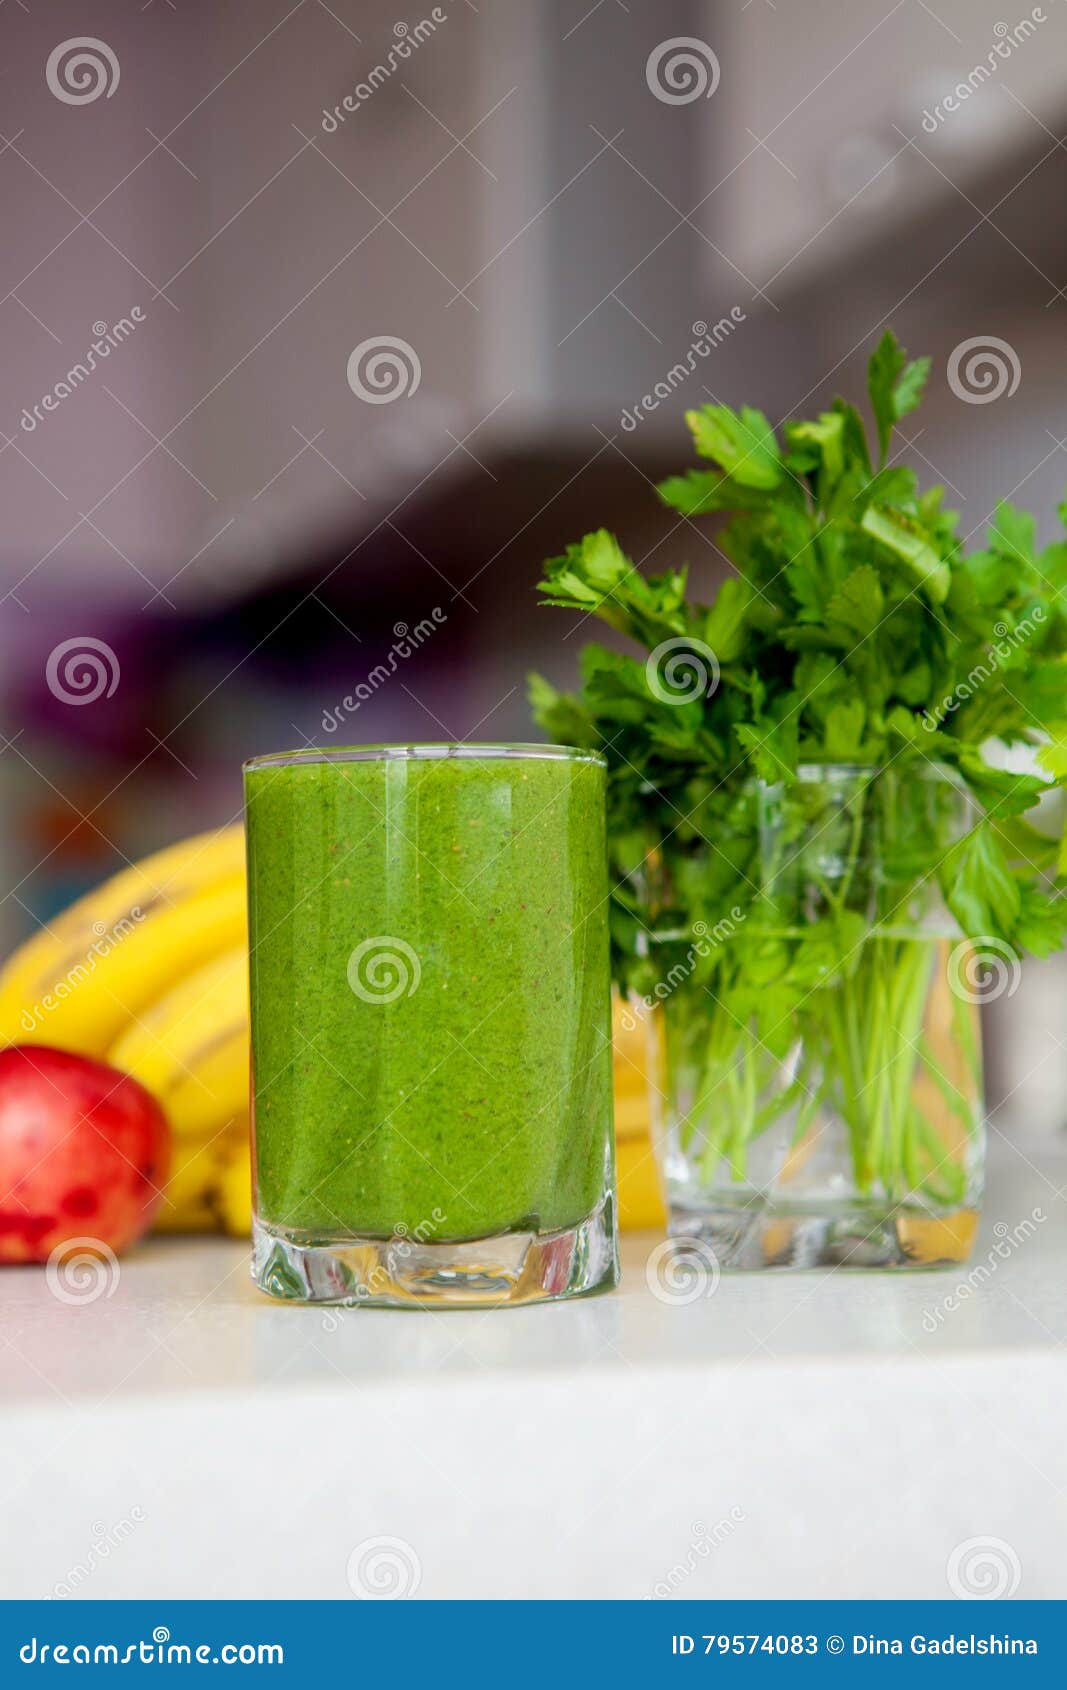 Vitamin Cleansing Green Smoothie. Detox Stock Image - Image of healthy ...